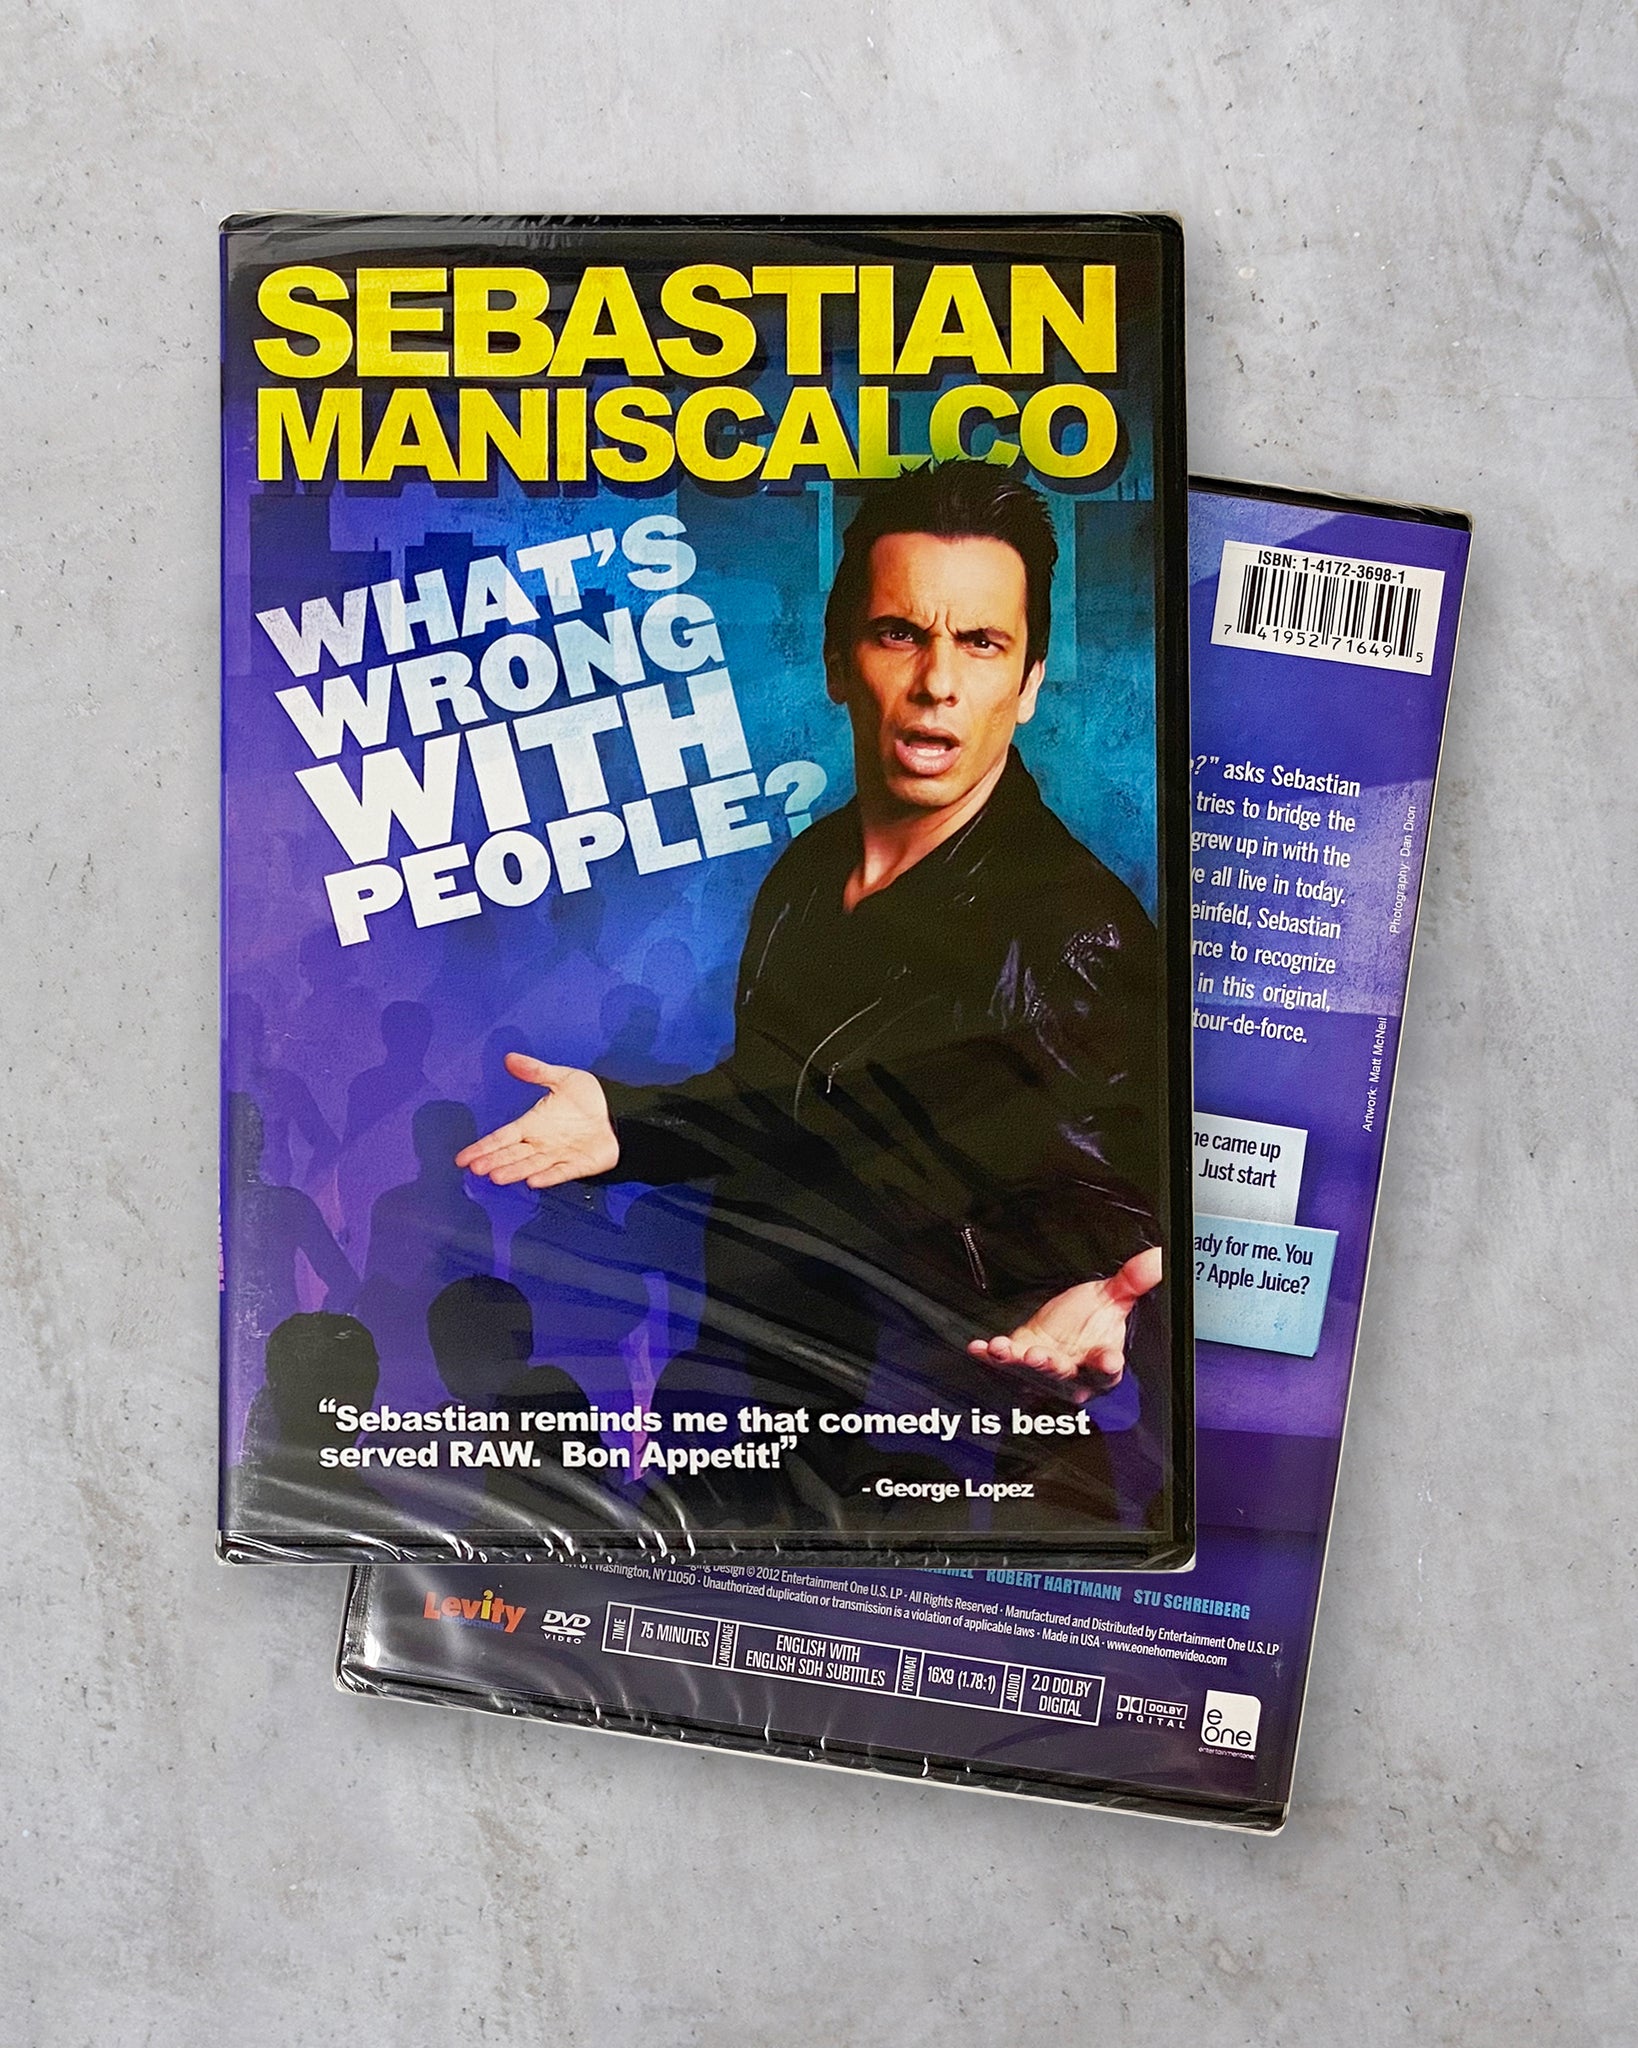 Sebastian Maniscalco “What’s Wrong with People” DVD